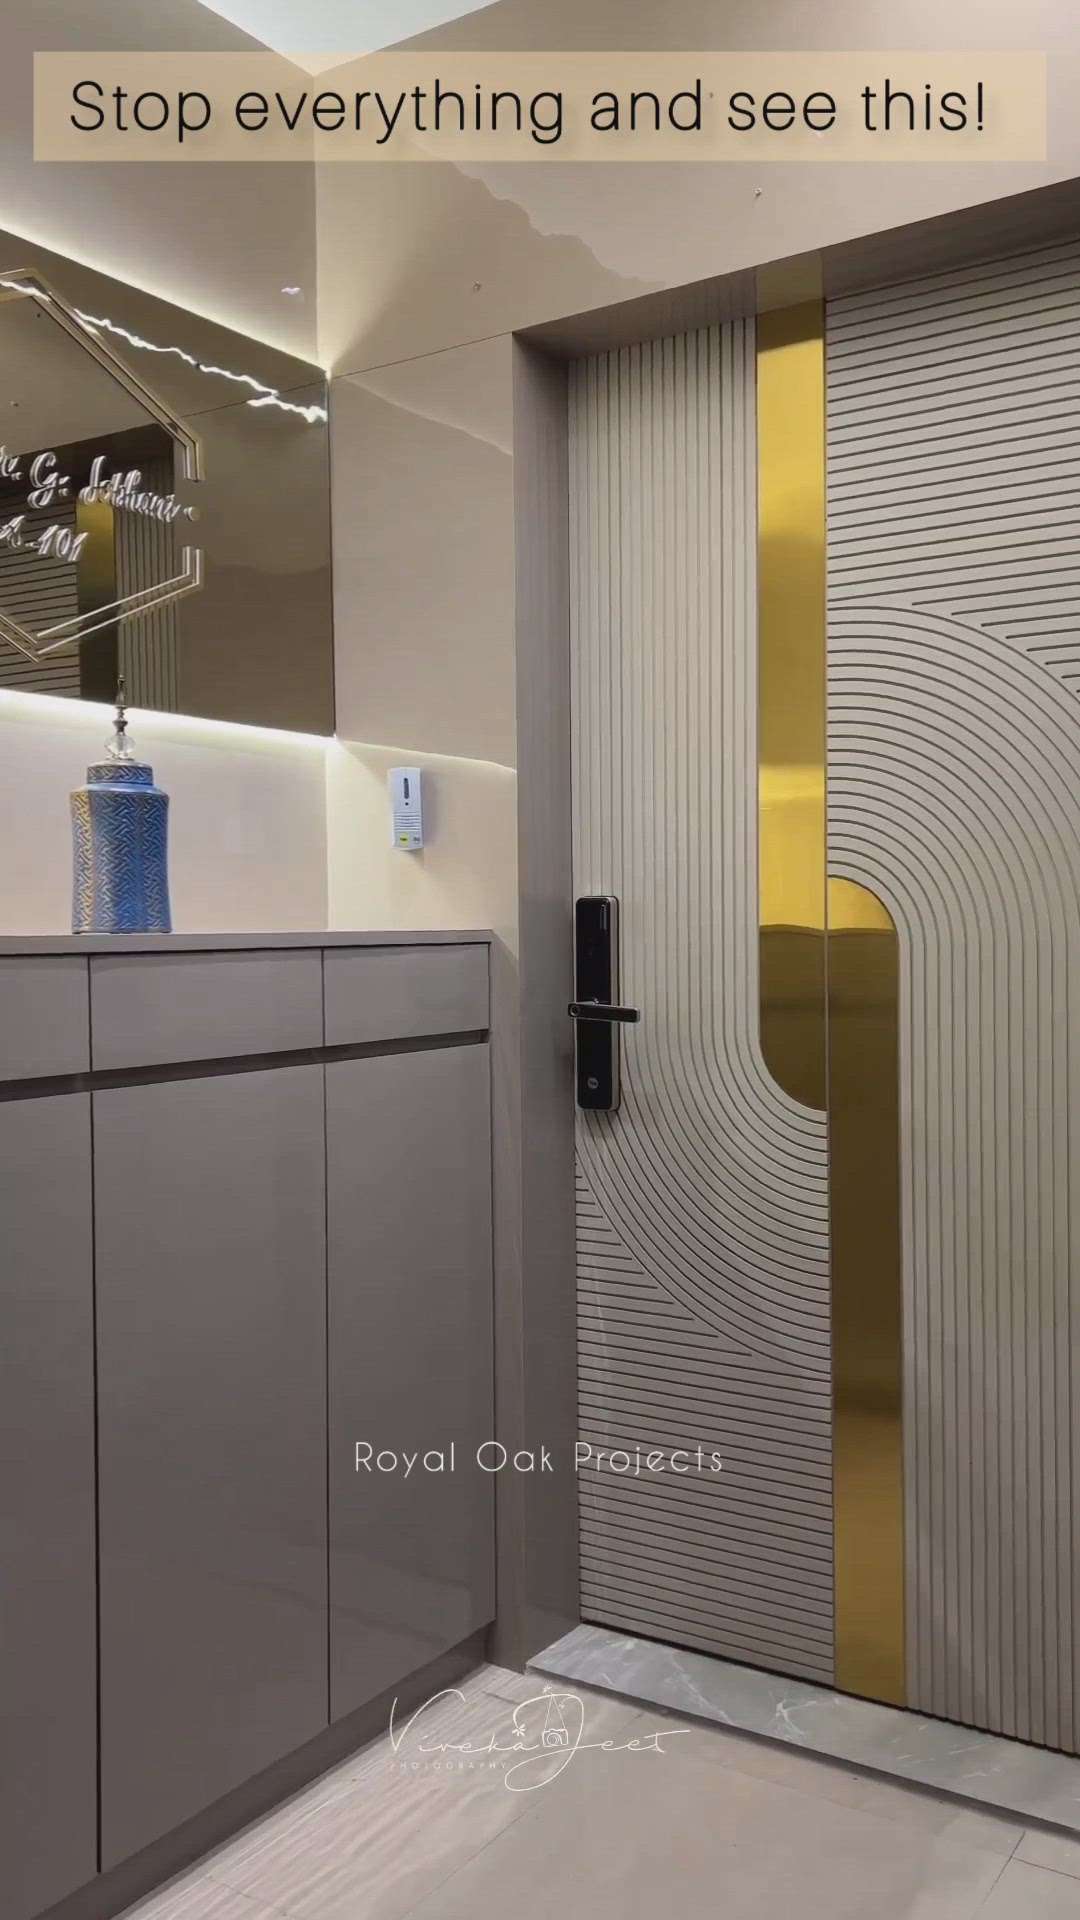 Royal Oak Projects specialize in luxury interior design projects in Indore and surrounding cities. Message us for free consultation and designing custom interiors for your home or office. 

___________
#home #homesweethome #homedecor #homedesign #homeinterior #architecture #builder #interiordesign #design #luxury #luxuryhomes #housedesign #interior #construction  #homeinspiration #homestyle #homes #realestate #koloapp  #livingroom #livingroomdecor #bedroomdesign #bedroom #pool #indore #india #indorecity #madhyapradesh #mp #indori #indoregram